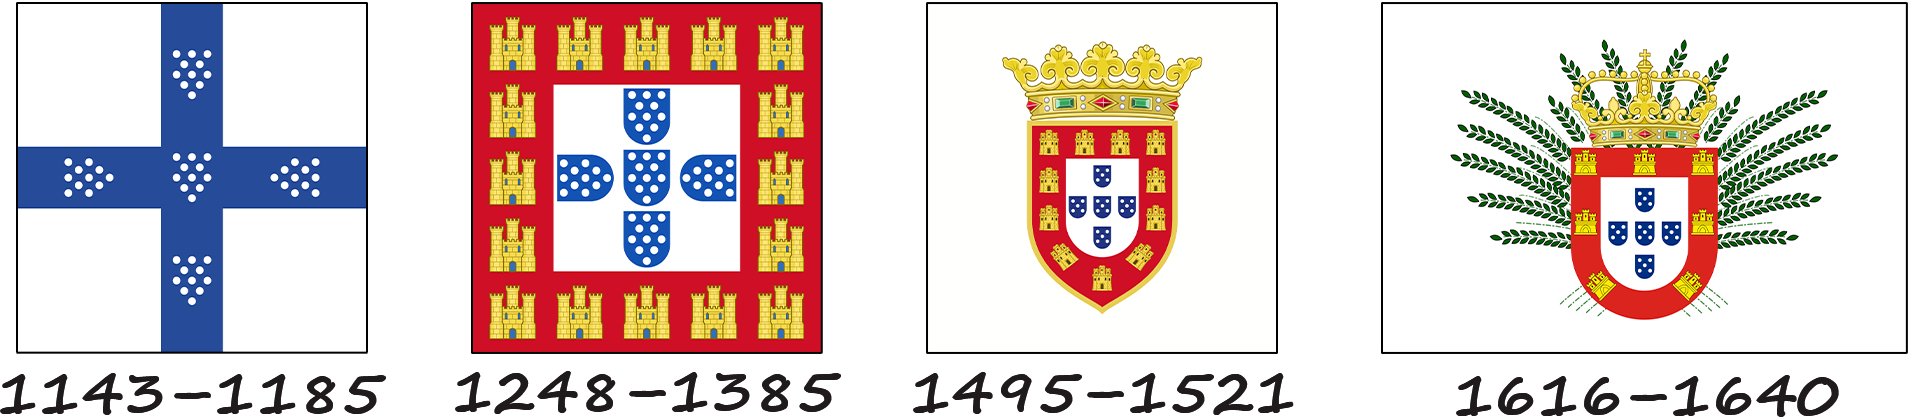 History of the Portuguese flag